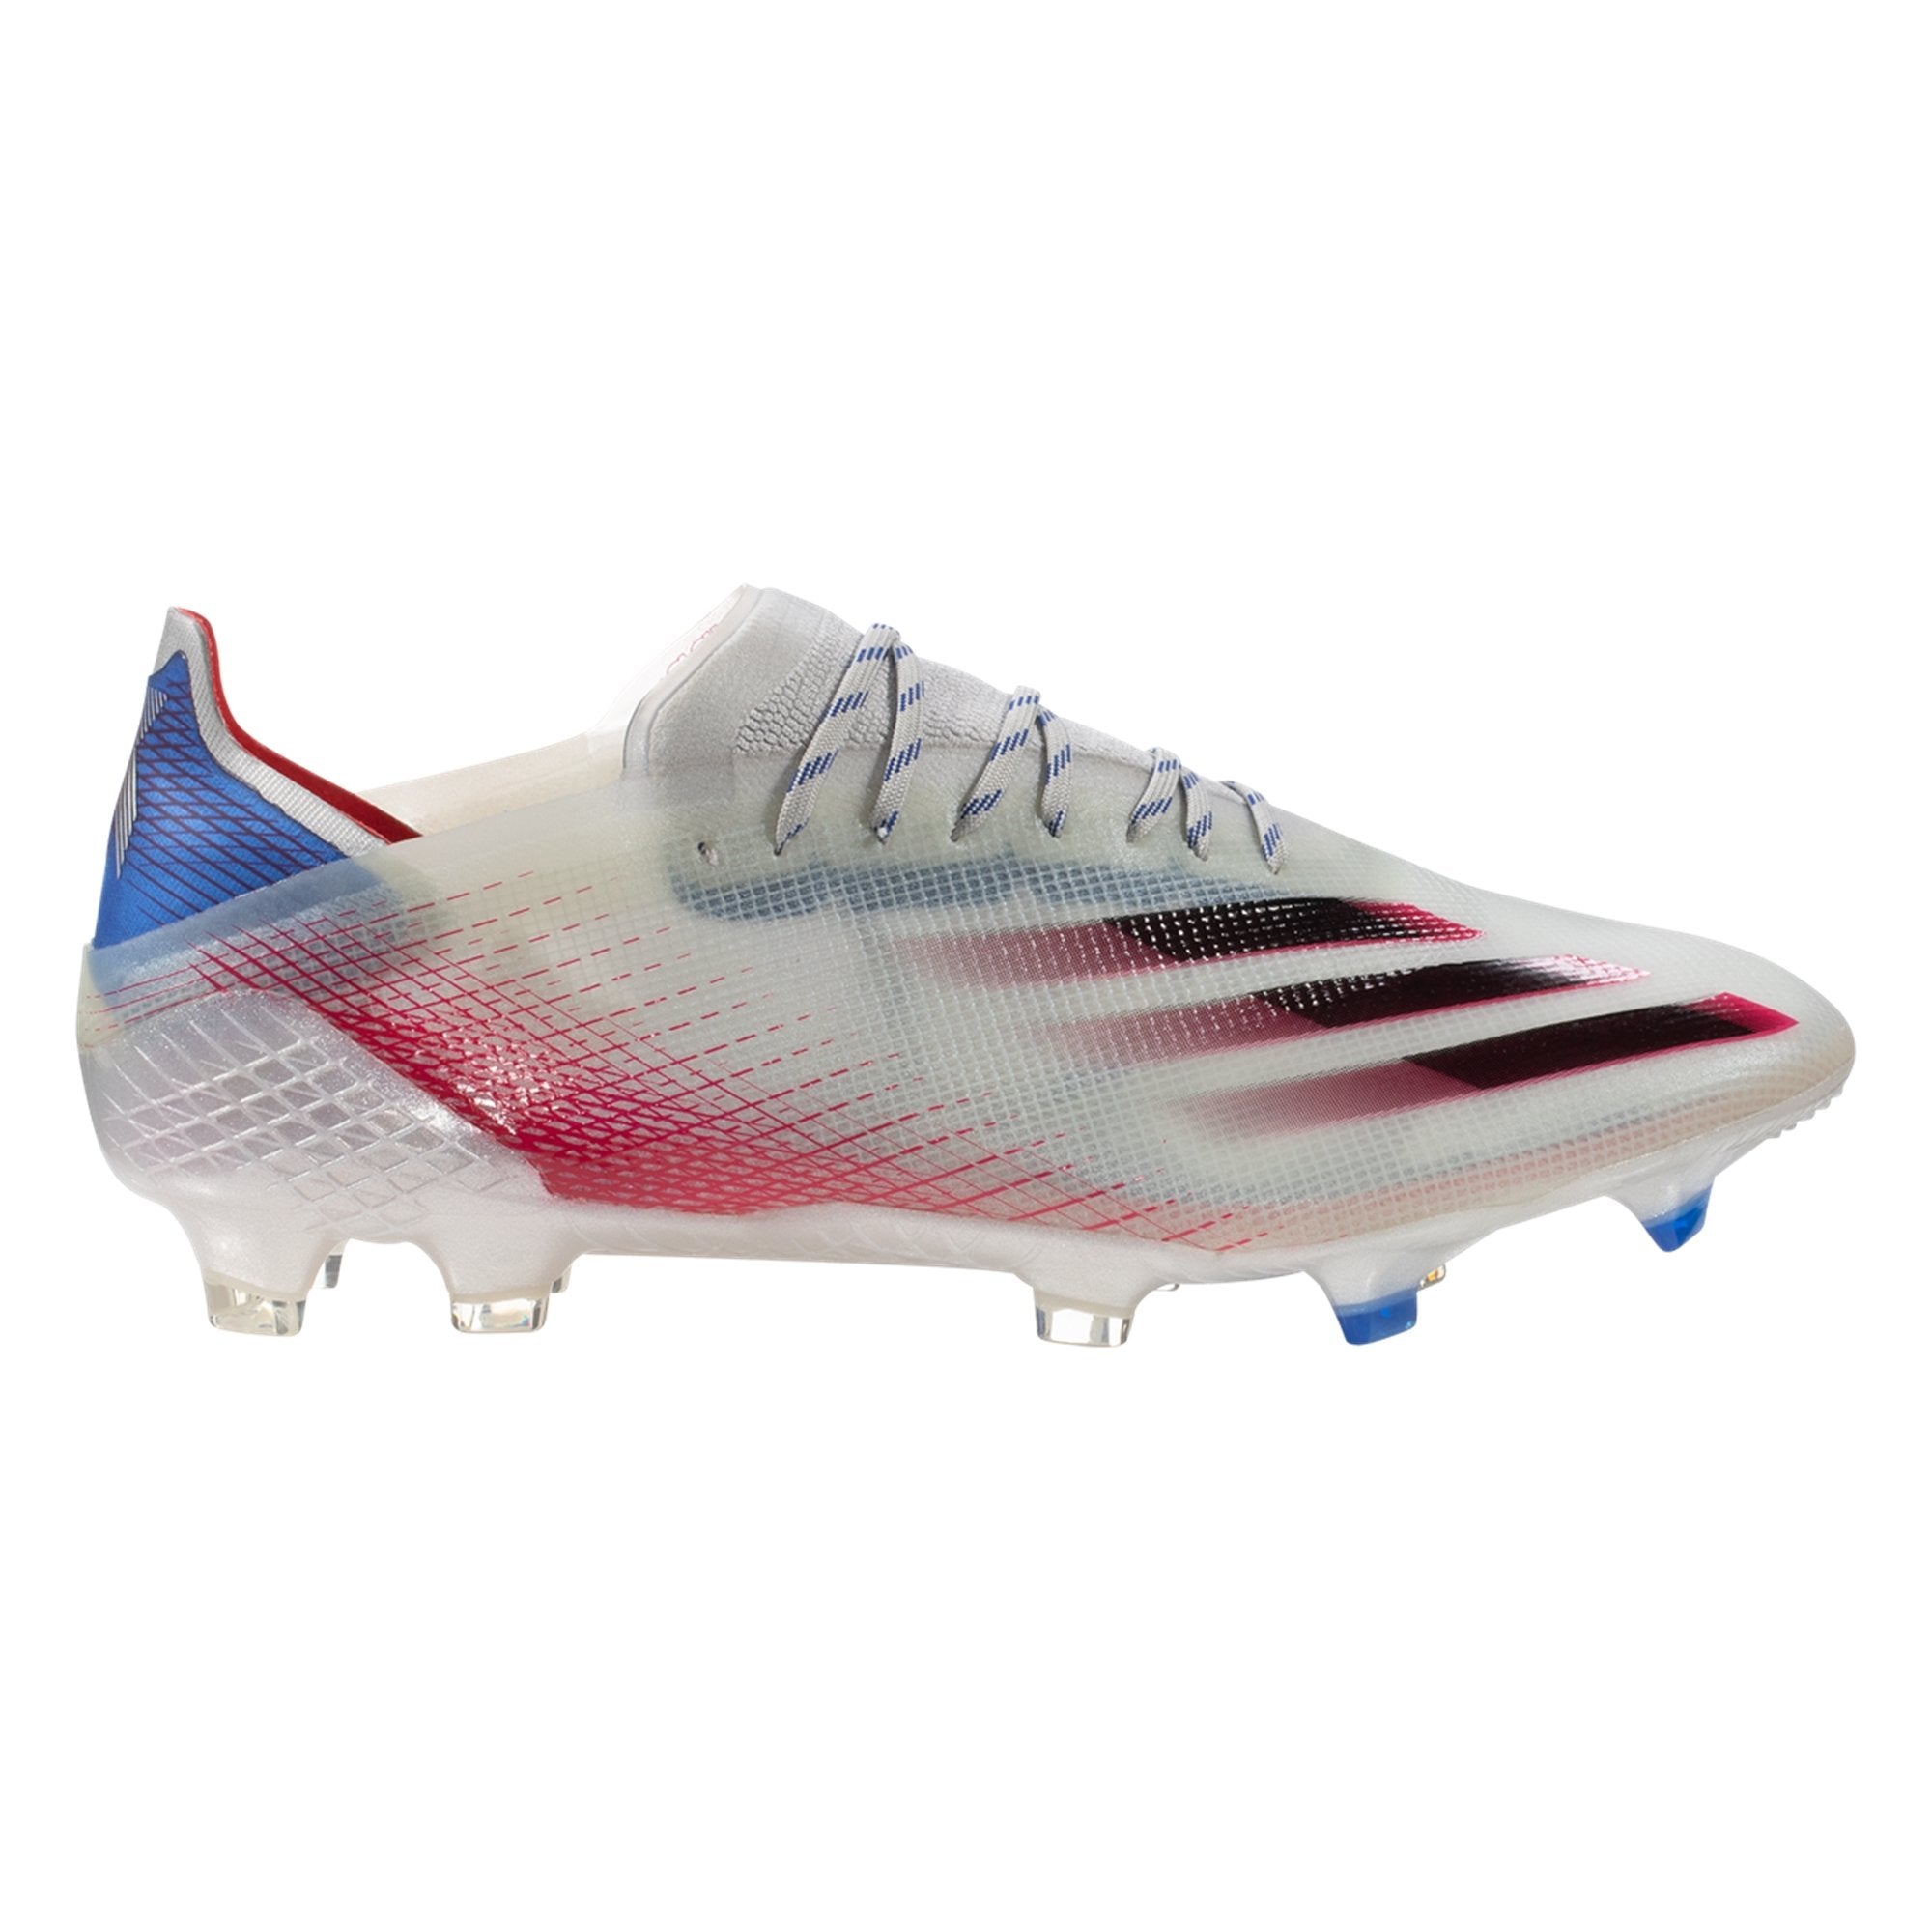 adidas Ghosted.1 Firm Ground Cleats - Silver Metallic/Core Black/Scarlet FW6897 – Zone USA